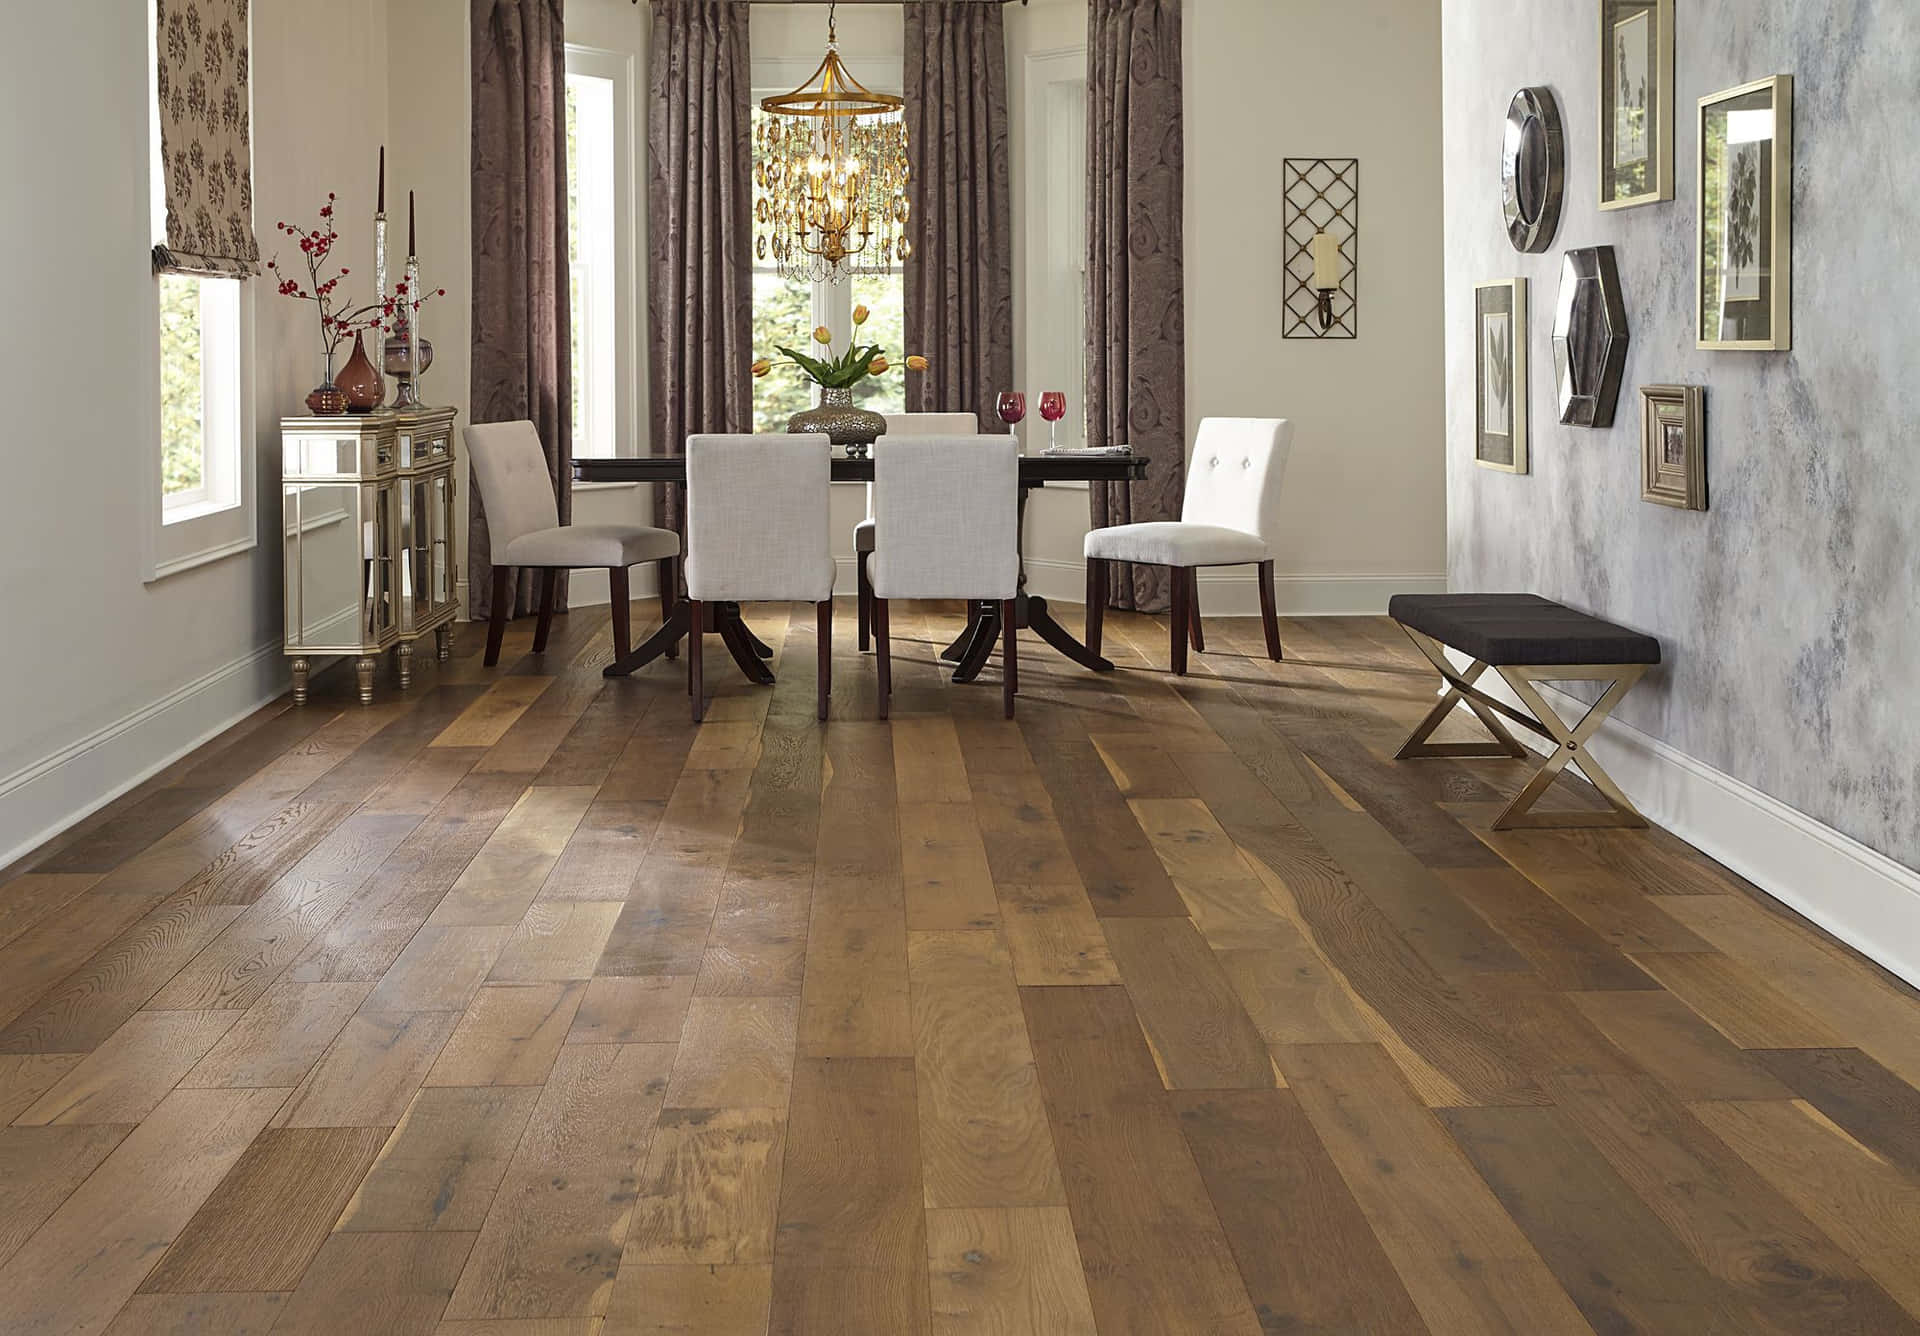 A Dining Room With Wood Floors And A Table